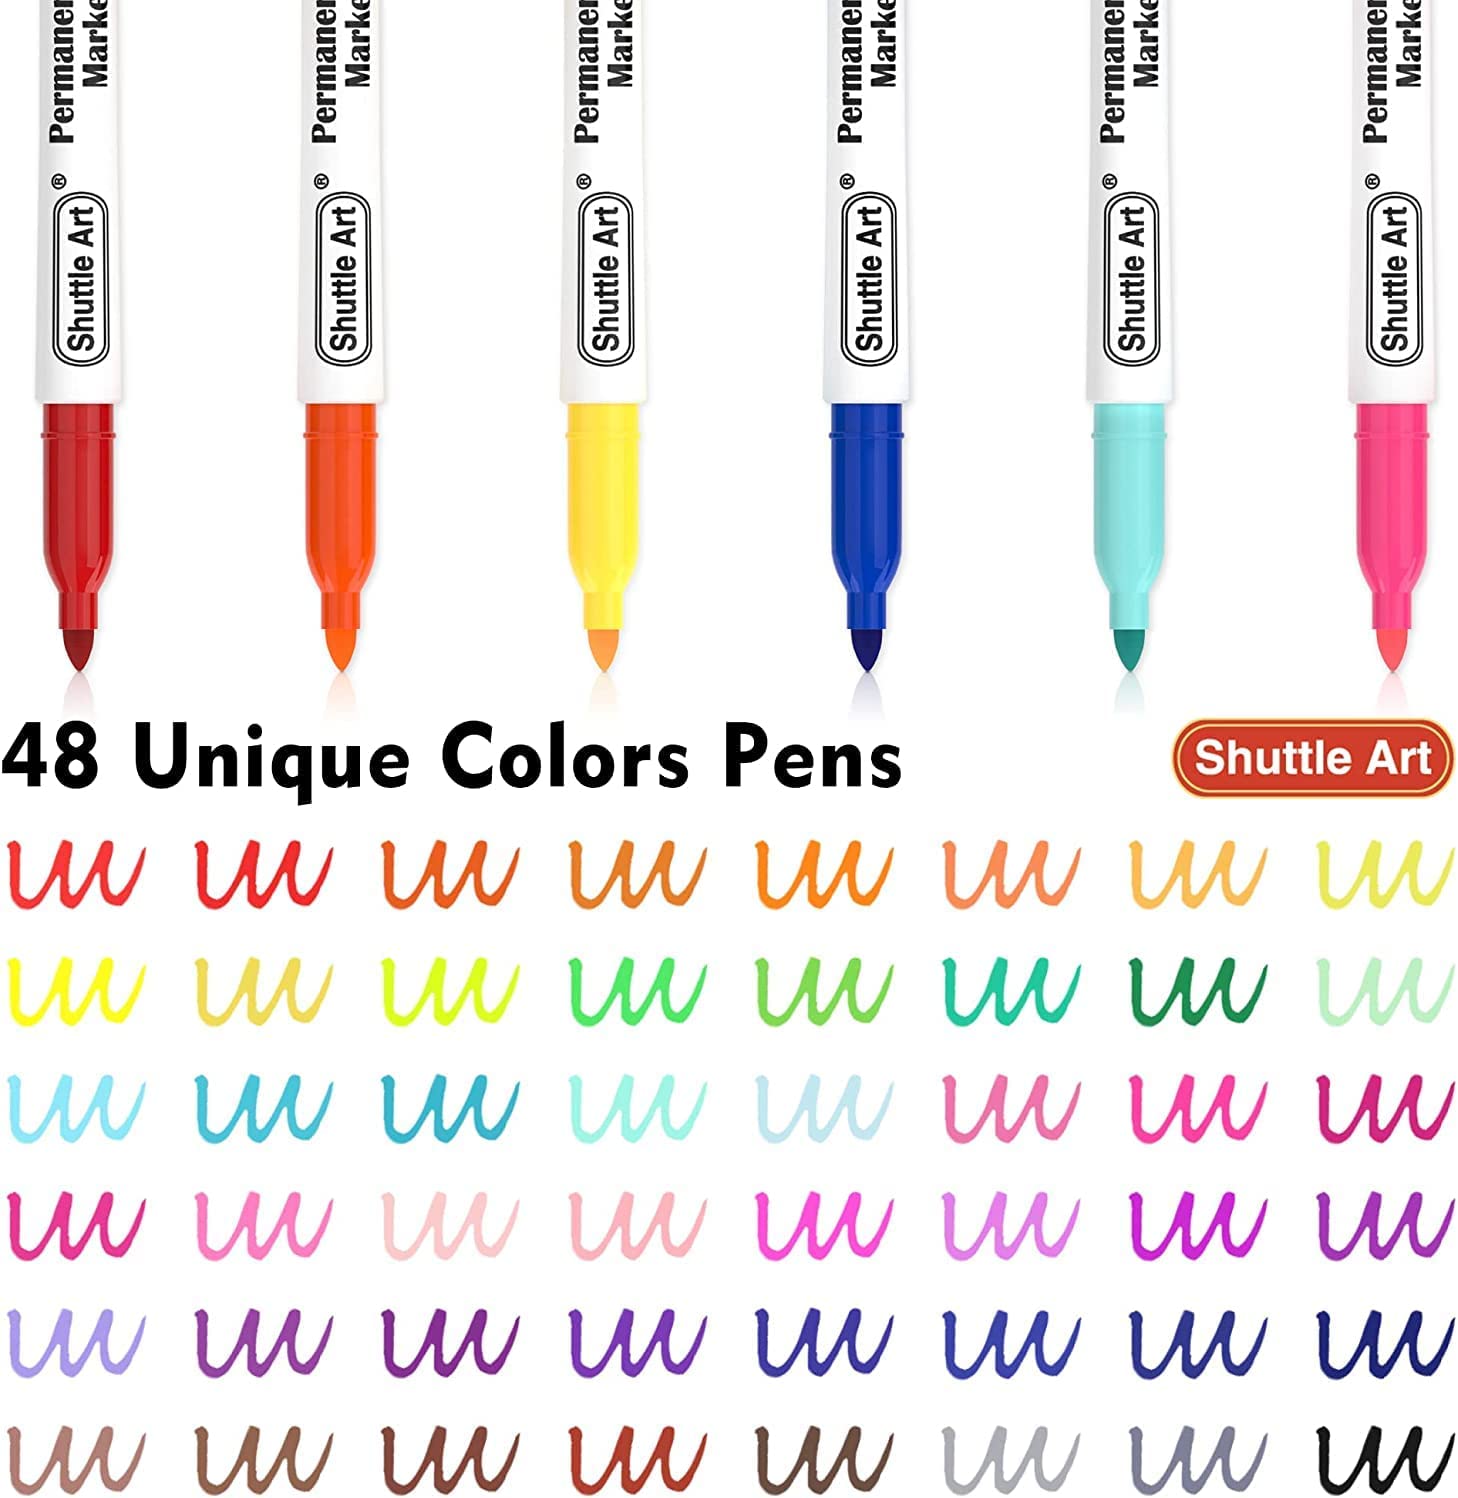 Shuttle Art Permanent Markers shade